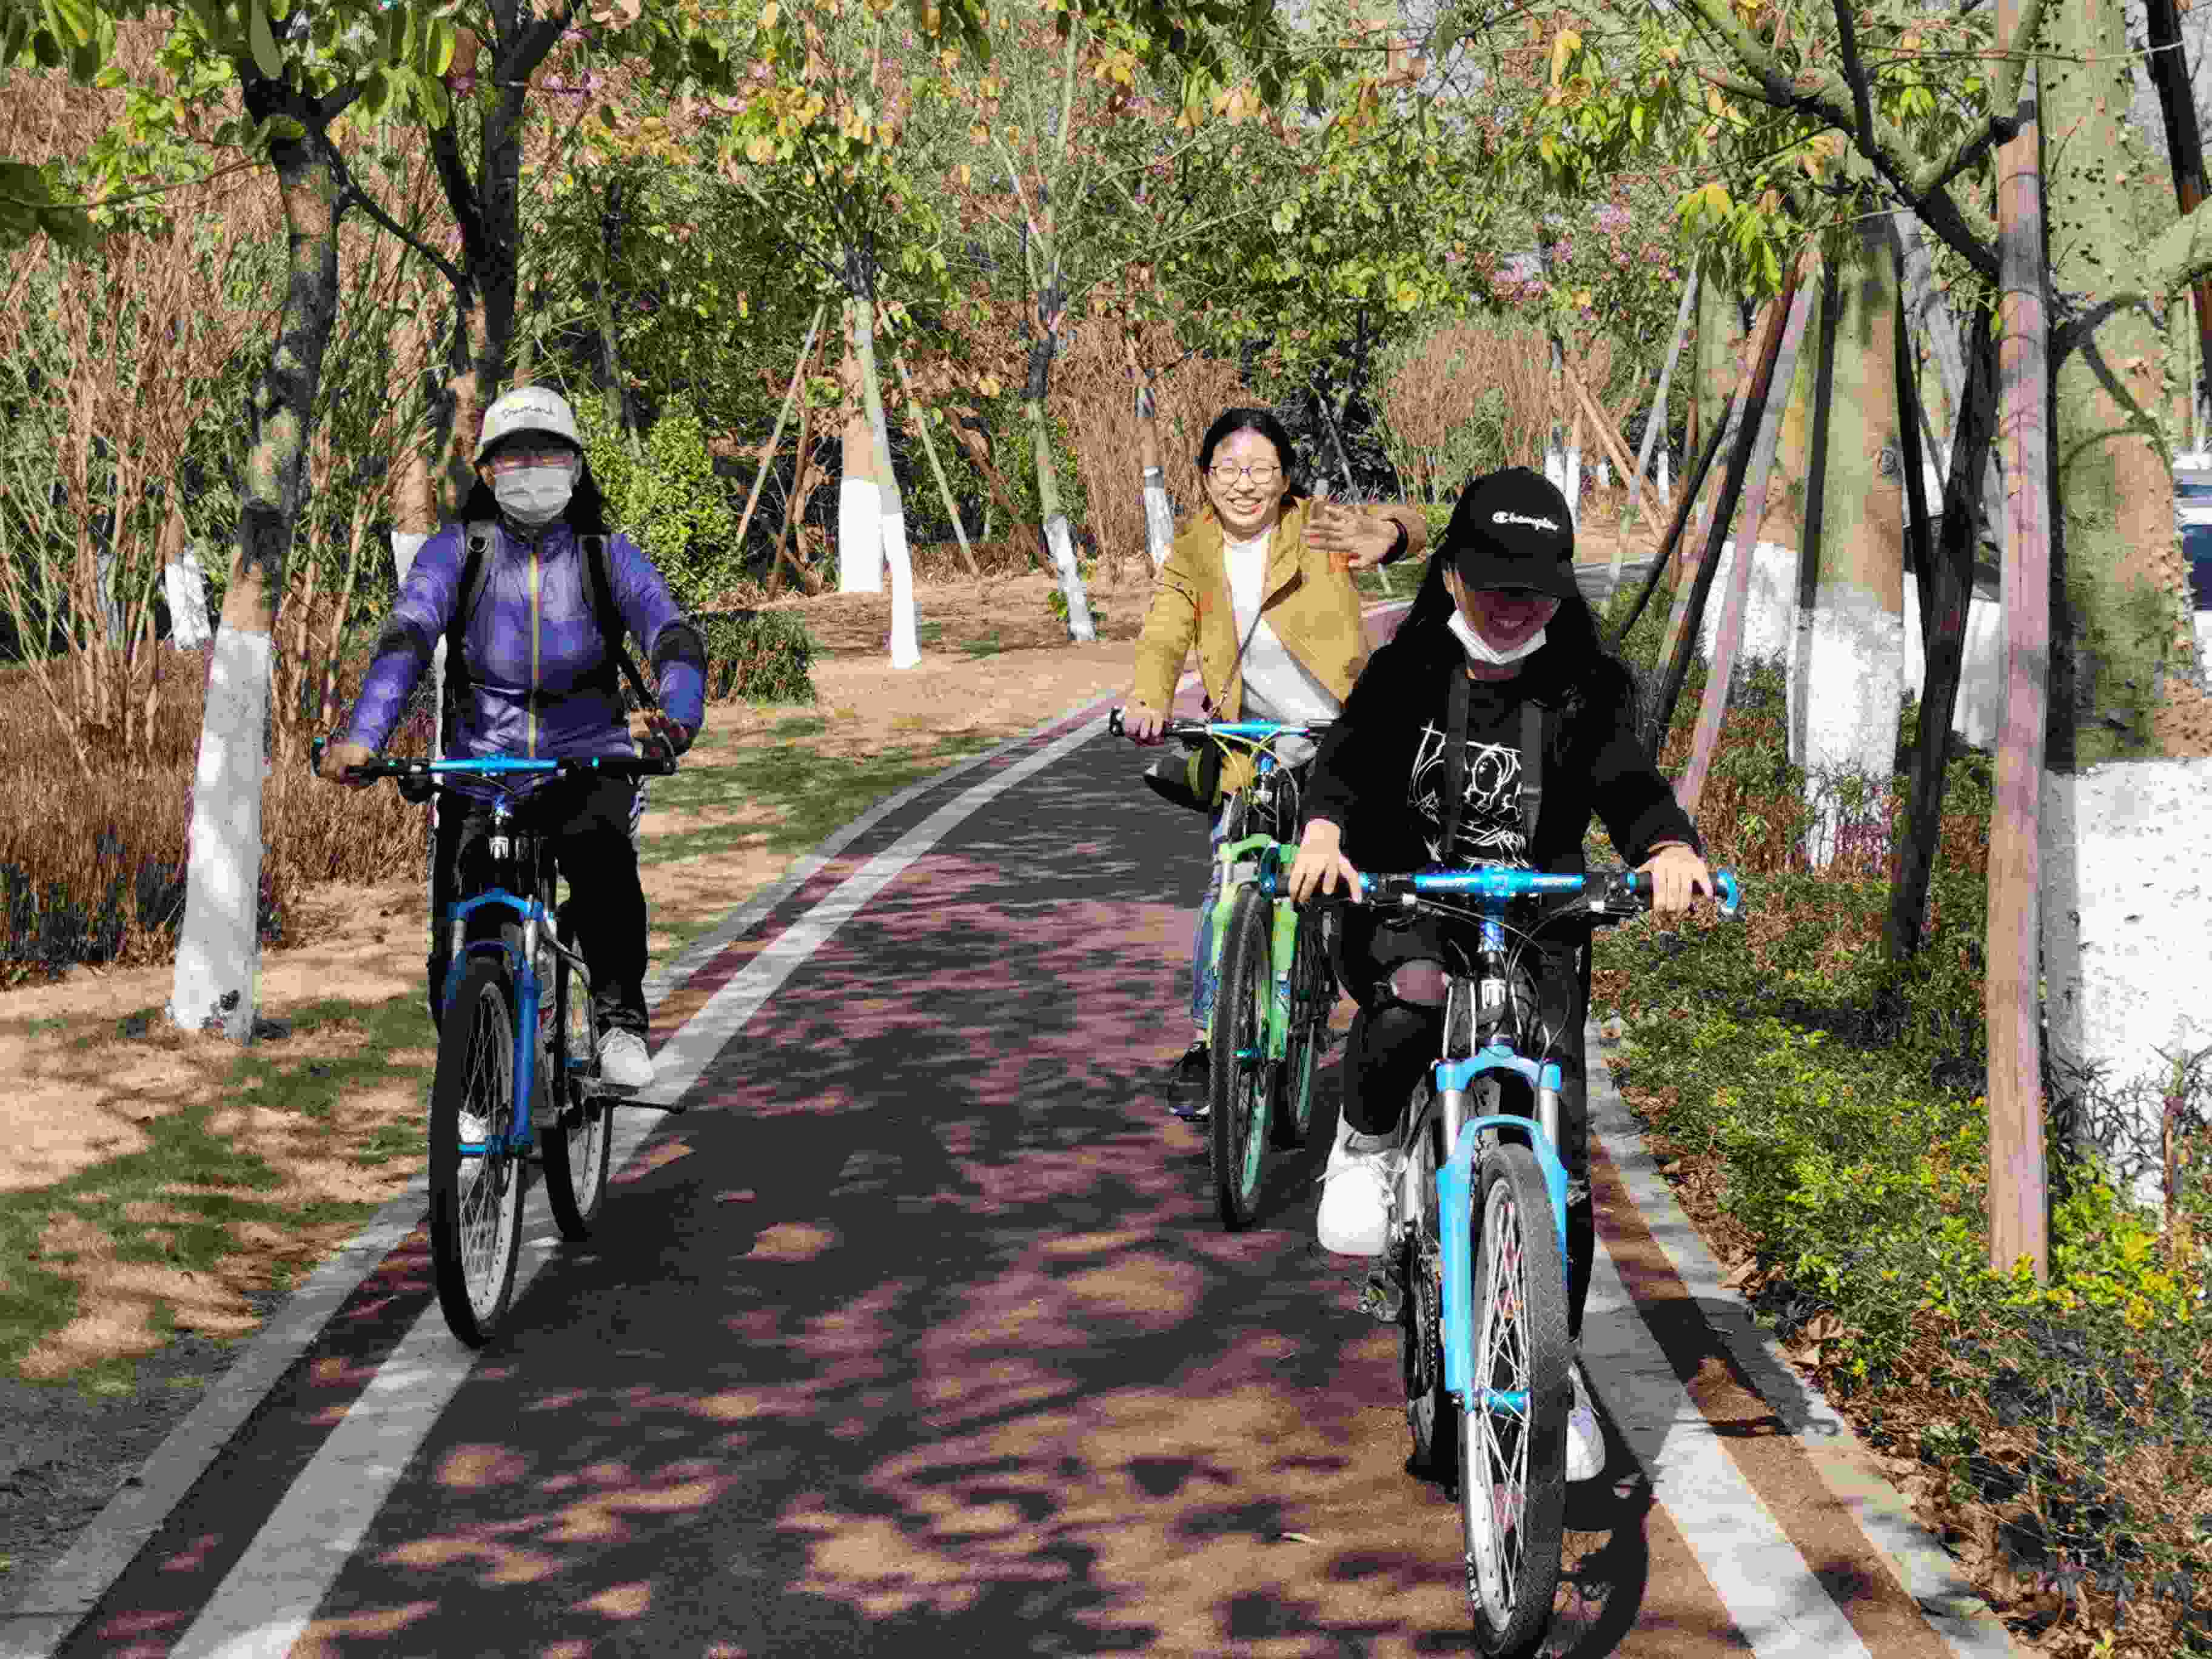 A group of three people are riding bikes and smiling.